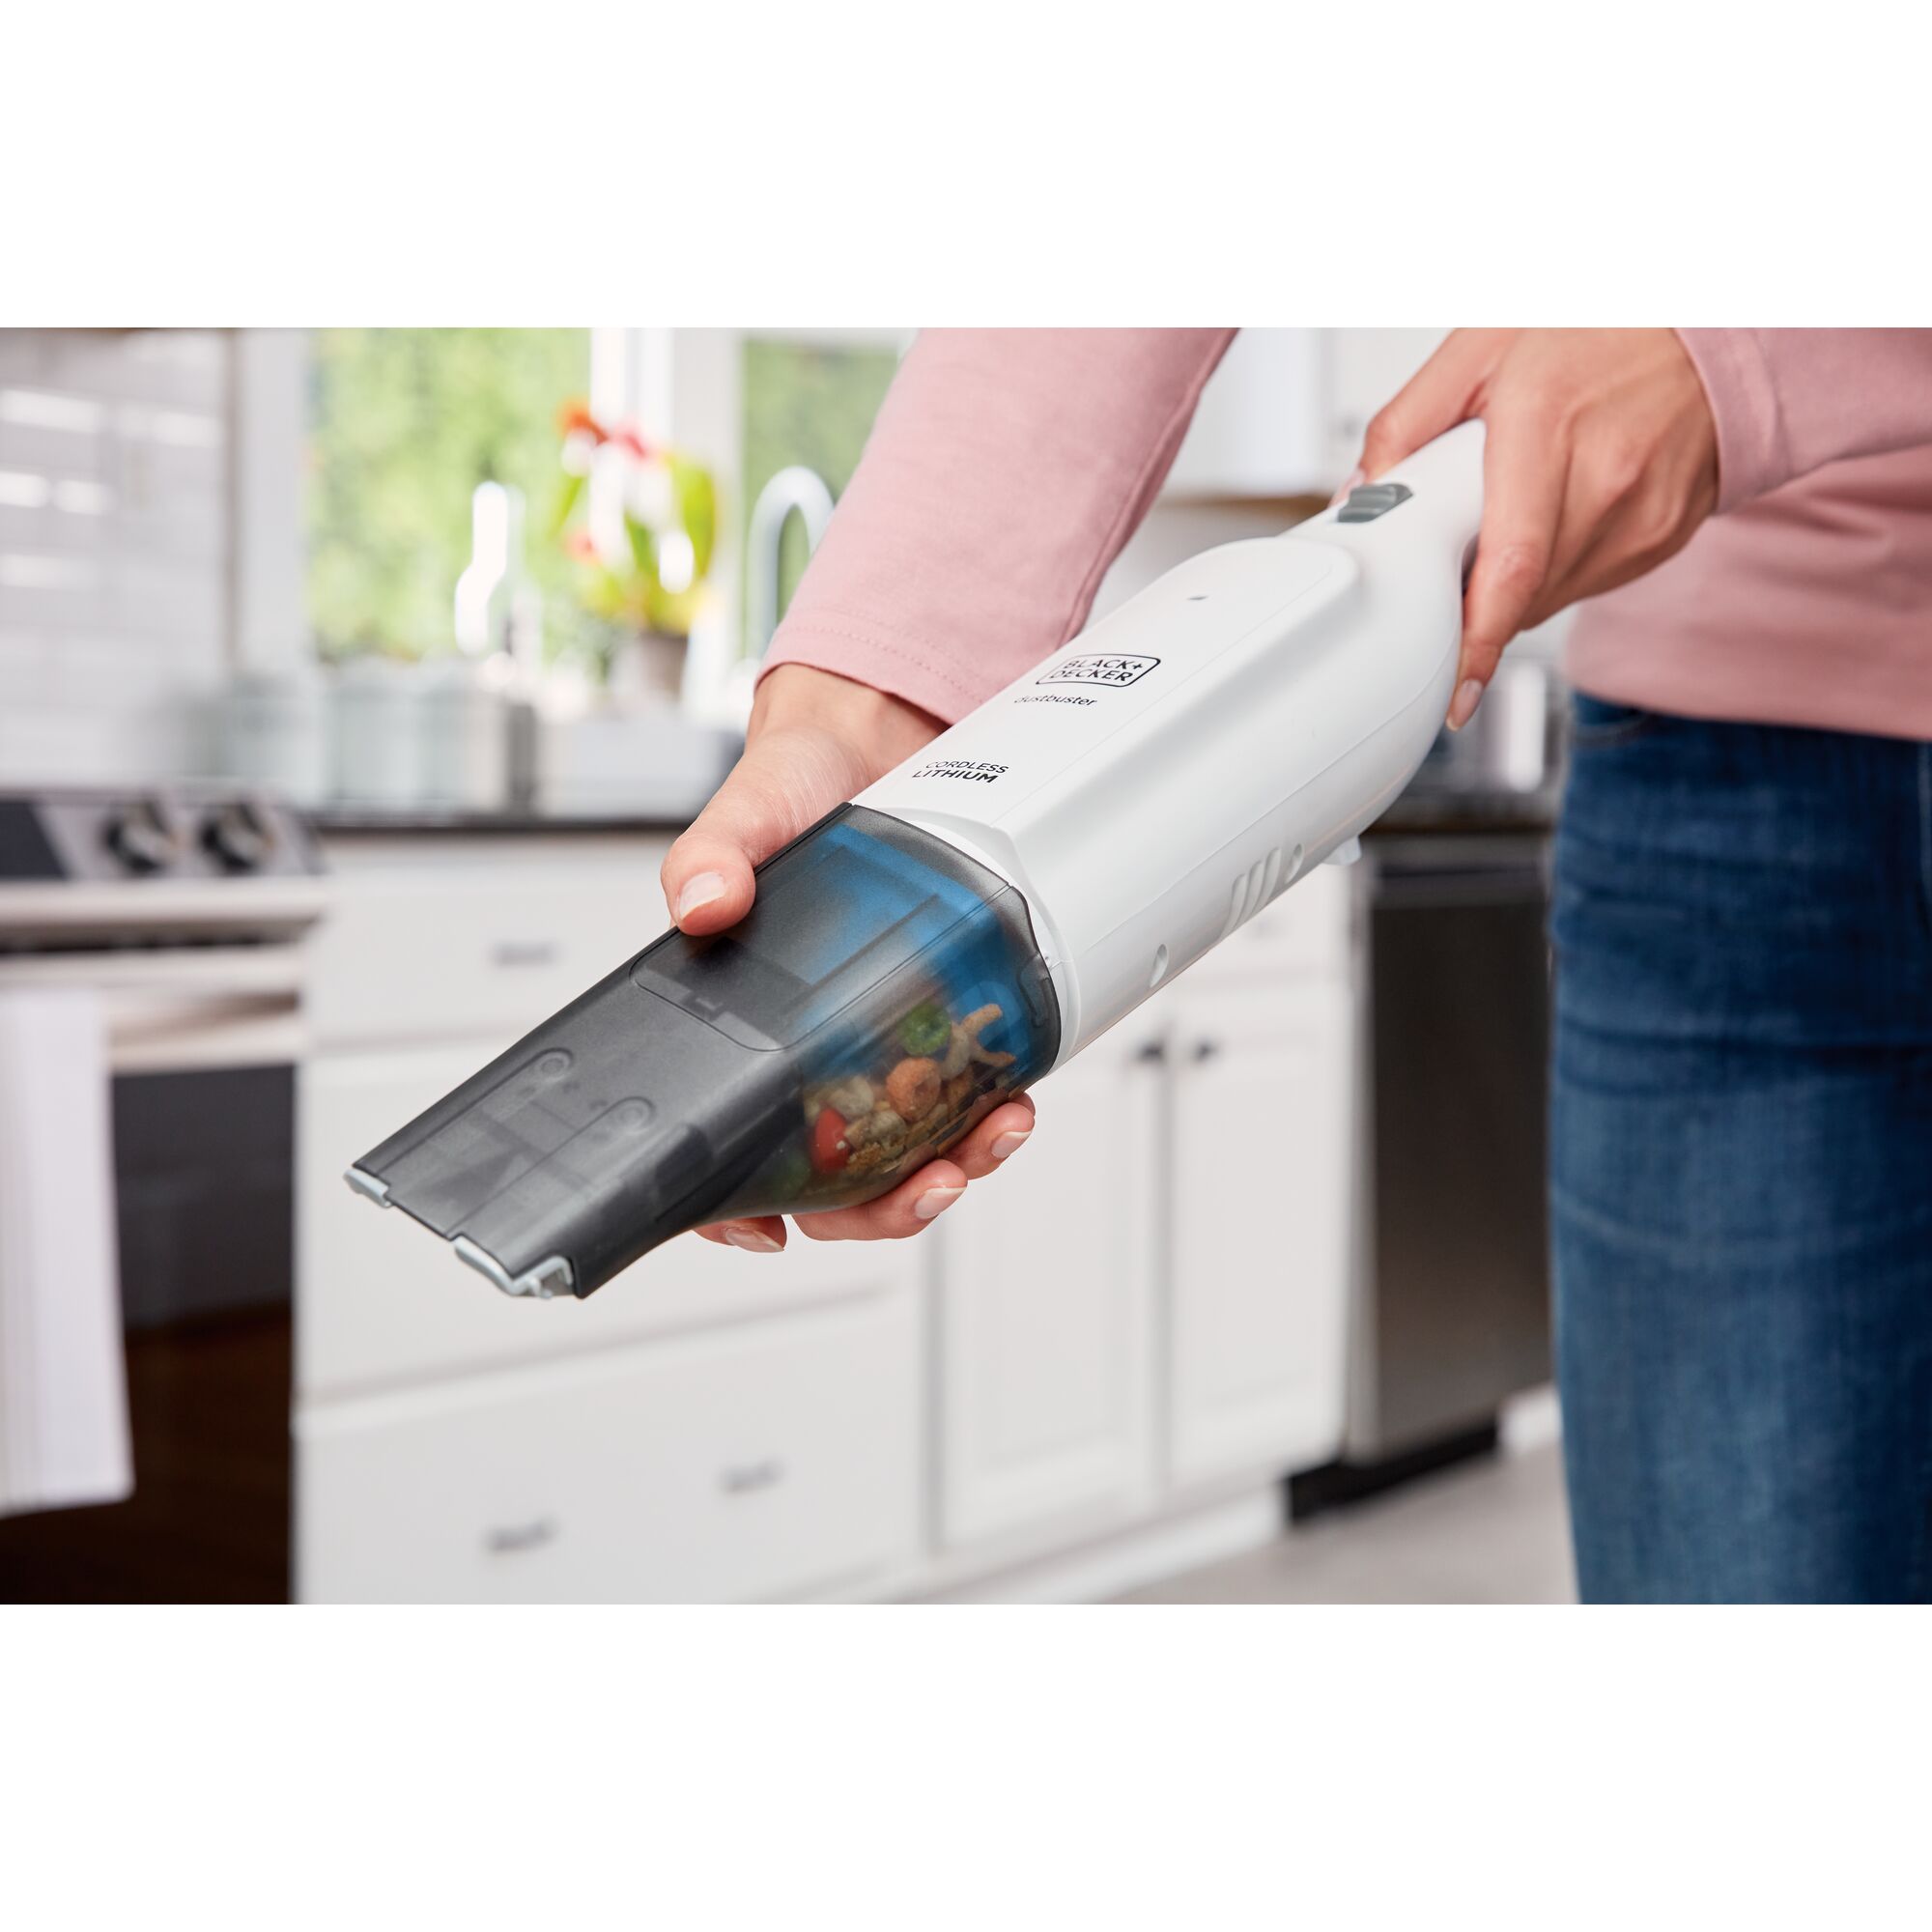 twist off bowl for easy emptying feature of Dustbuster AdvancedClean Cordless Hand Vacuum